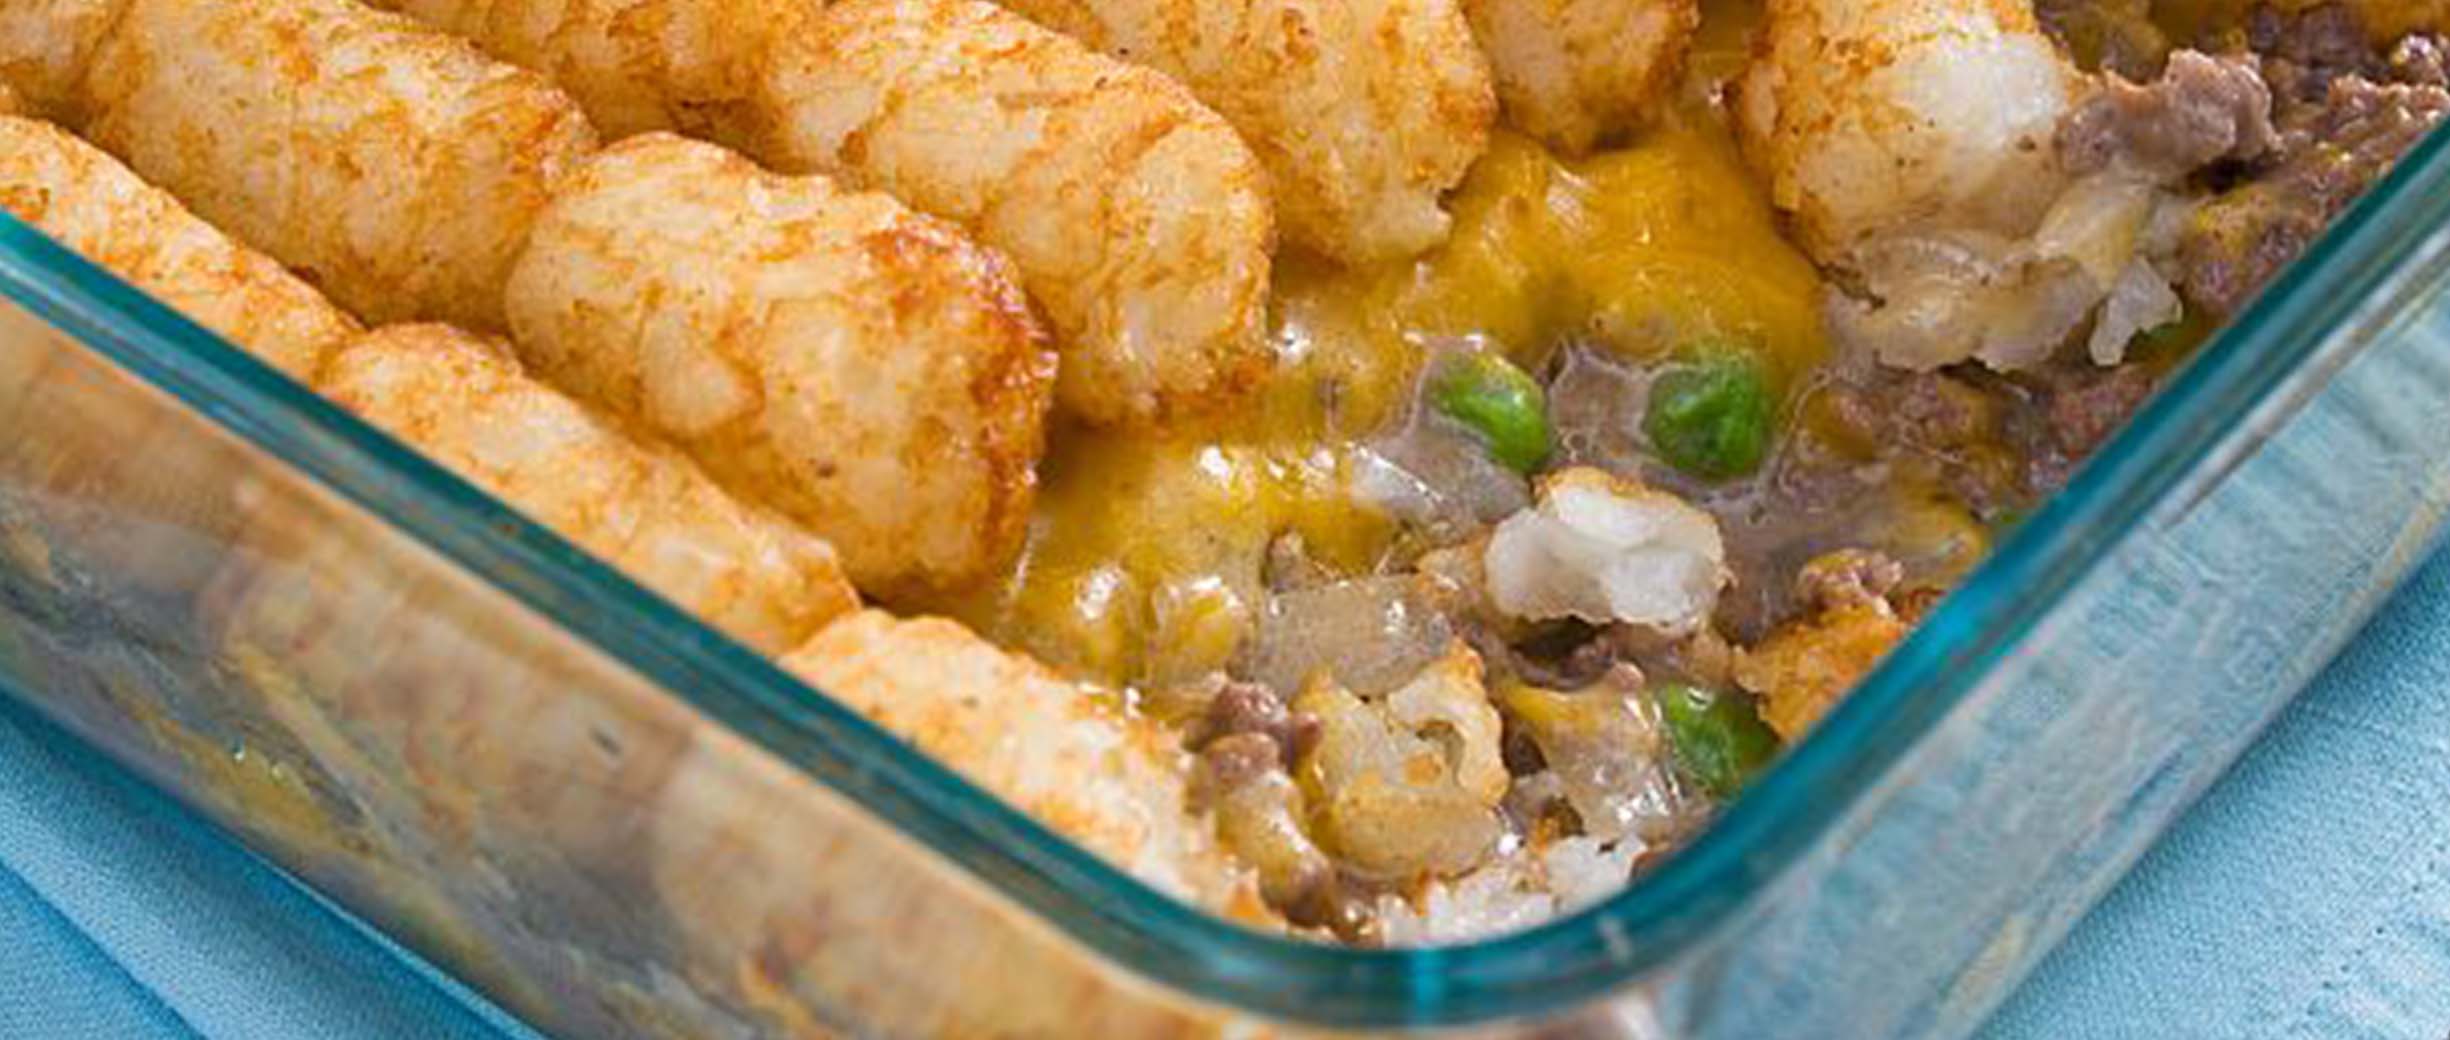 7 Ways to Eat Tater Tots for Dinner